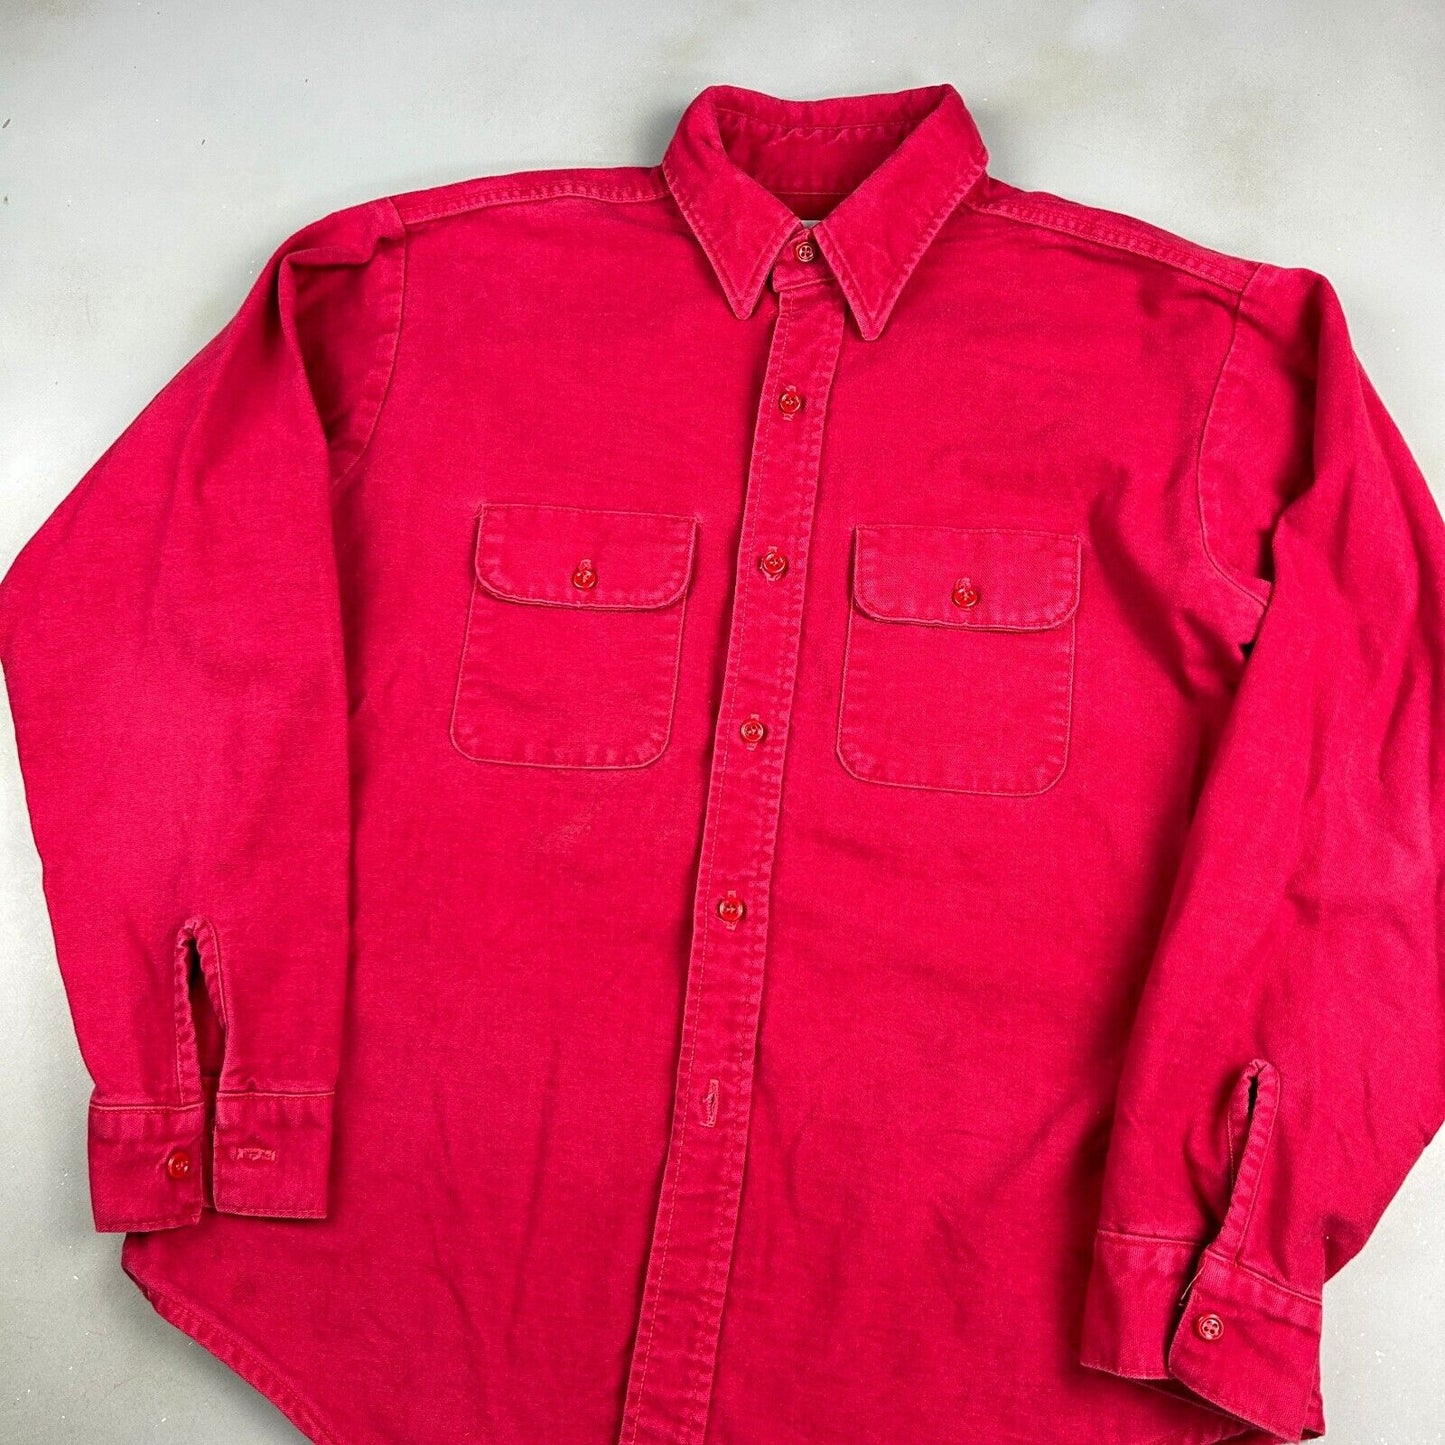 VINTAGE 90s Five Brother Red Chamois Cloth Button Up Shirt sz Large Adult